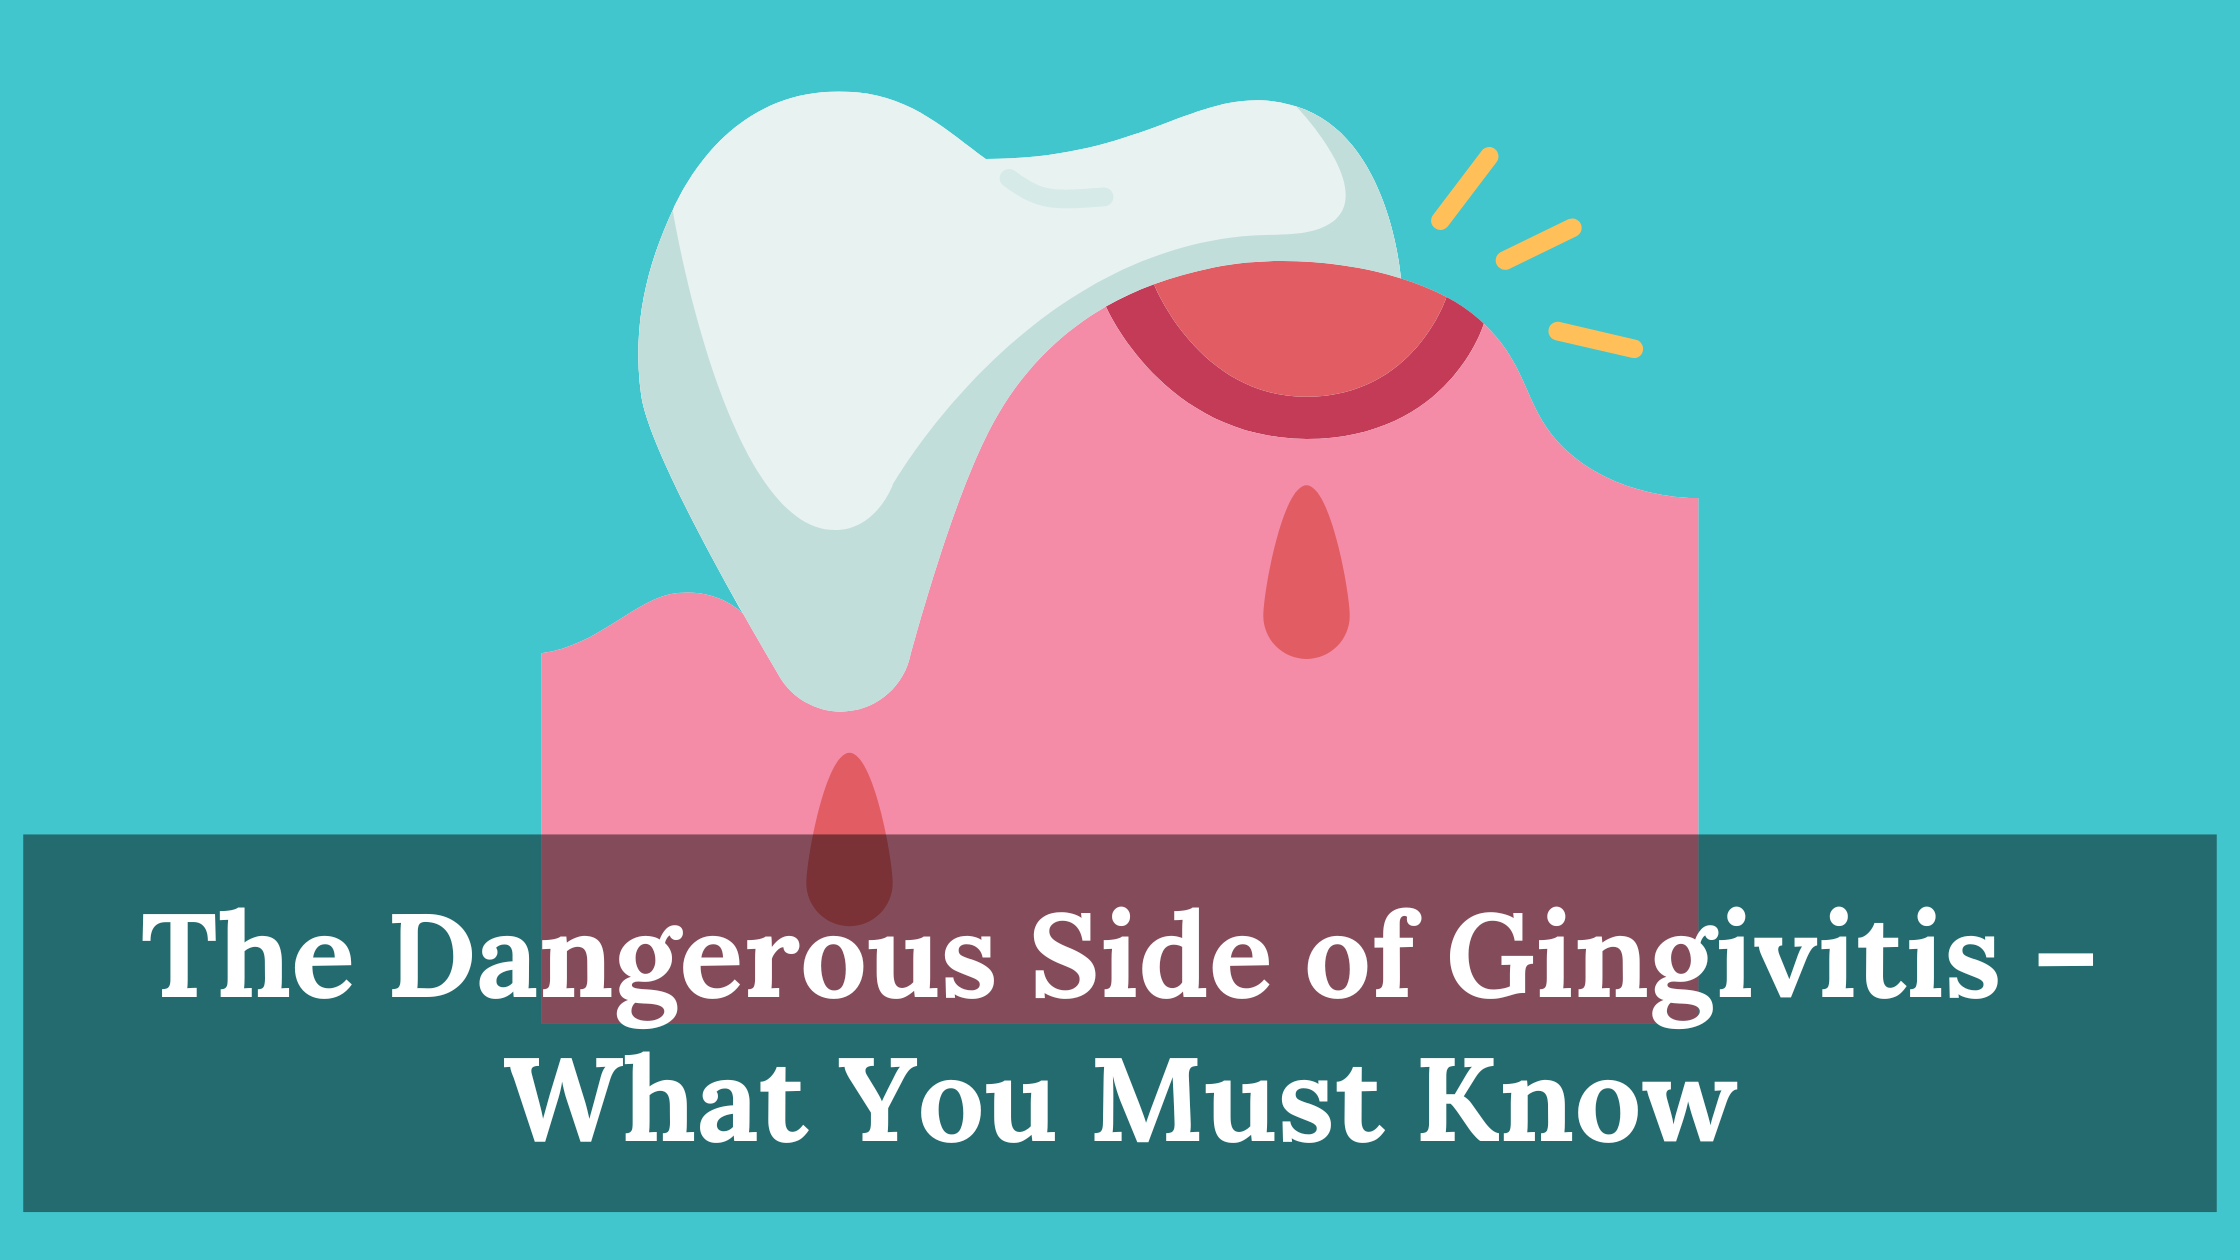 The Dangerous Side of Gingivitis – What You Must Know